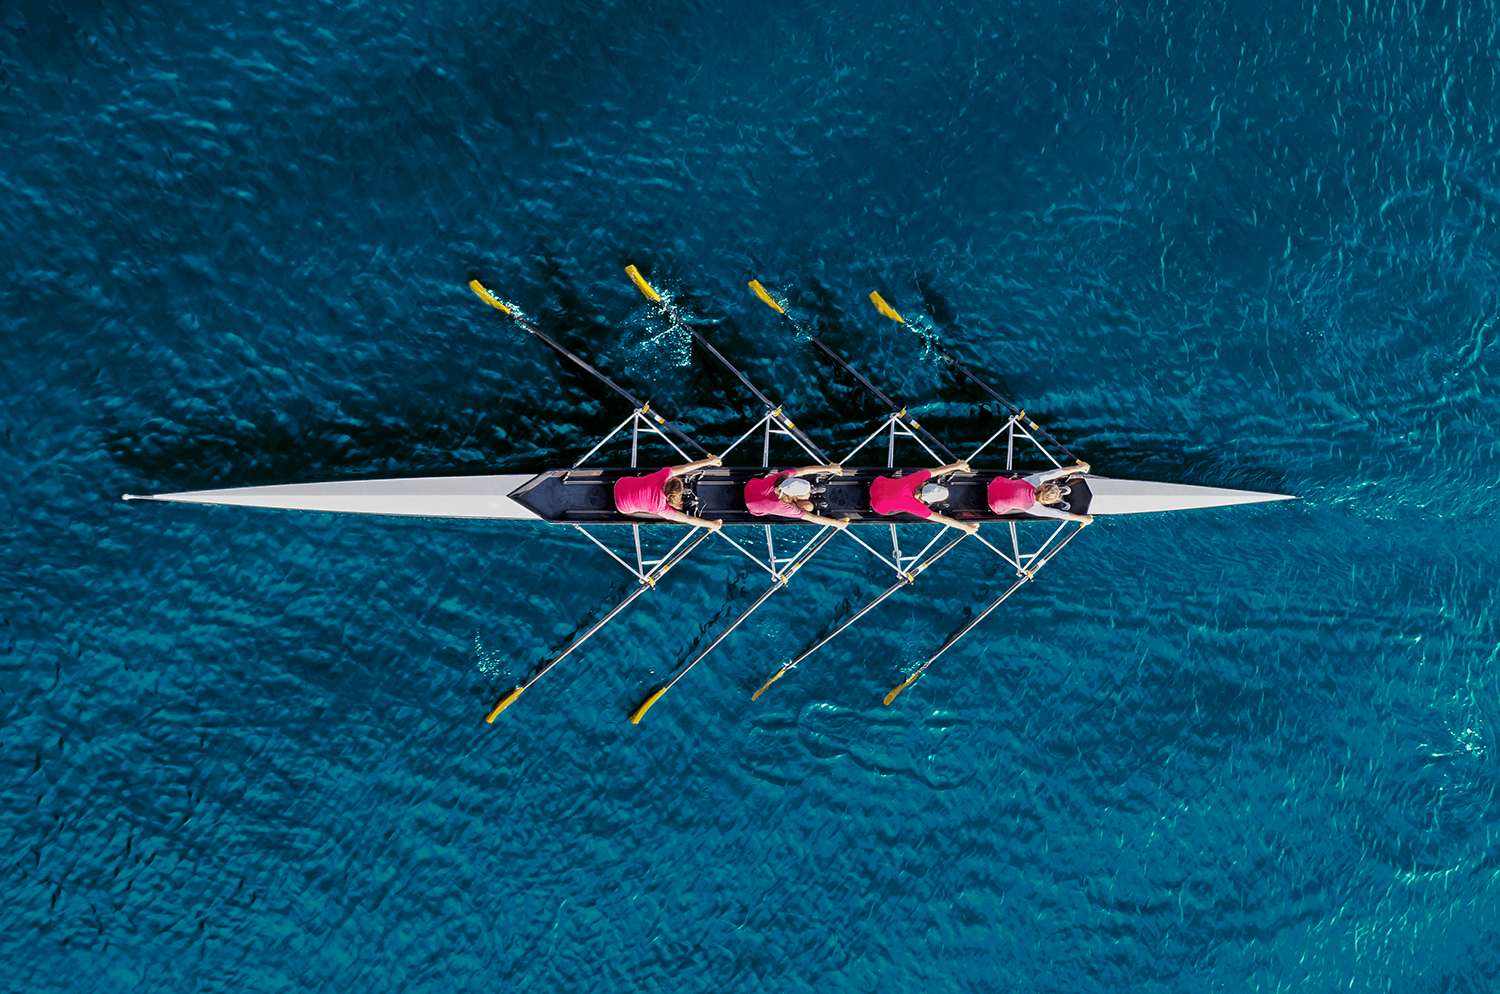 aerial image of a thin rowing boat with 4 teammates rowing in blue water